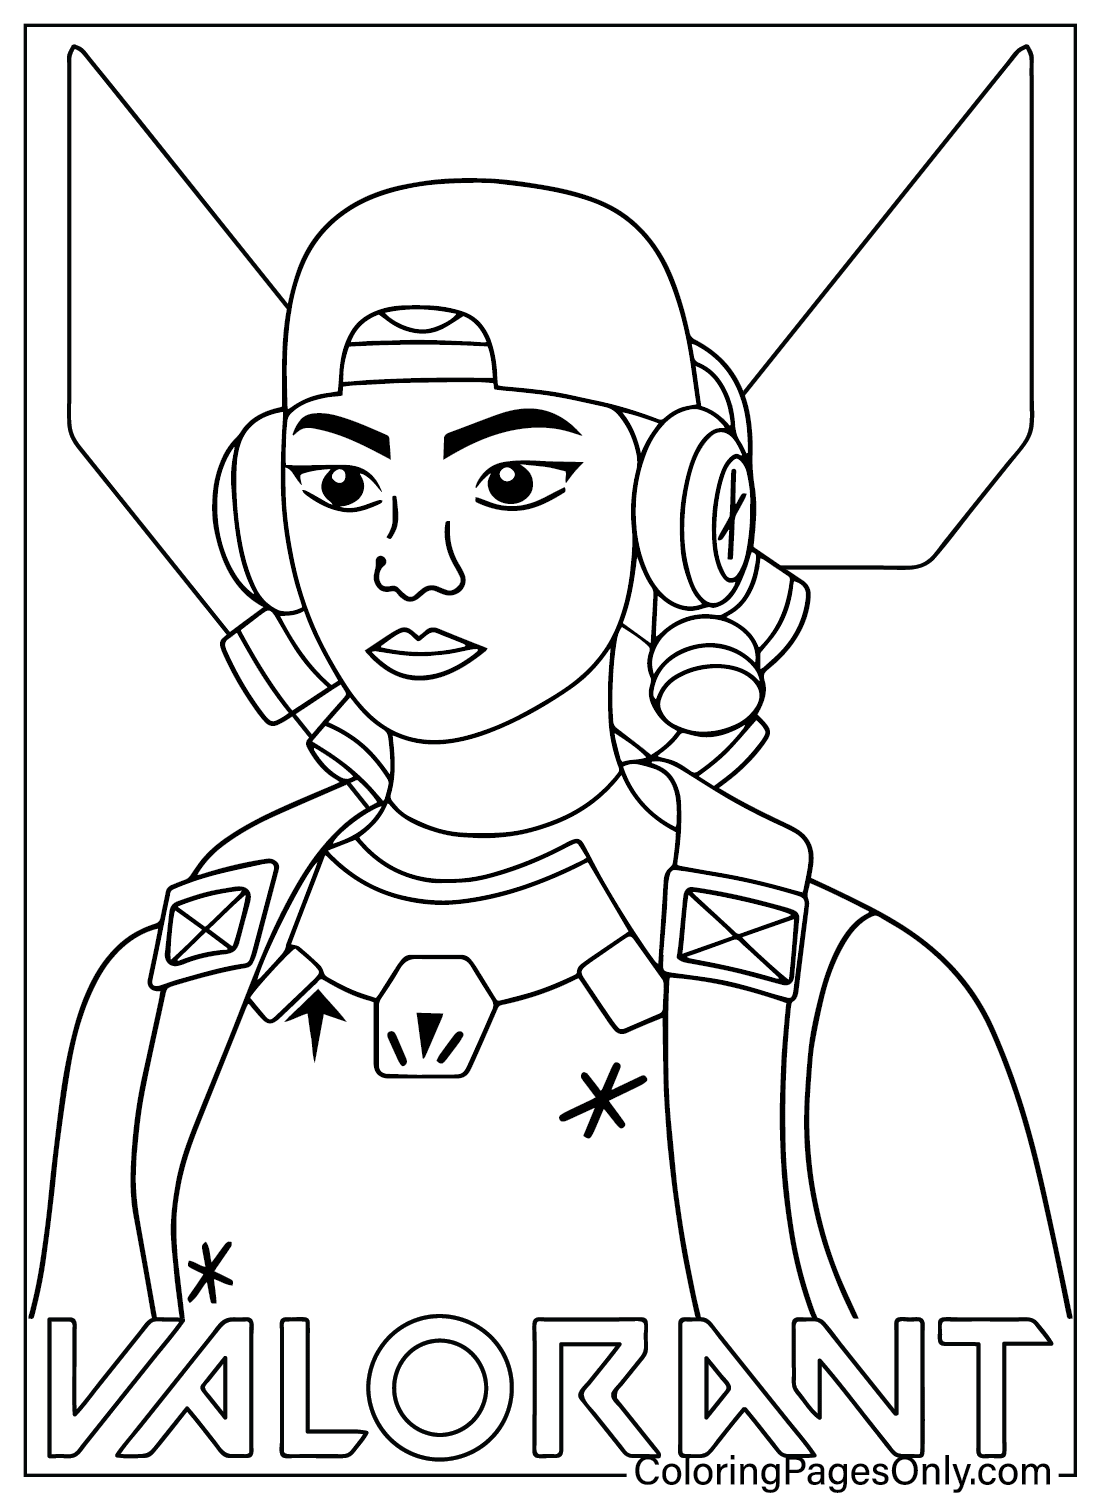 Raze Valorant Coloring Page - Free Printable Coloring Pages